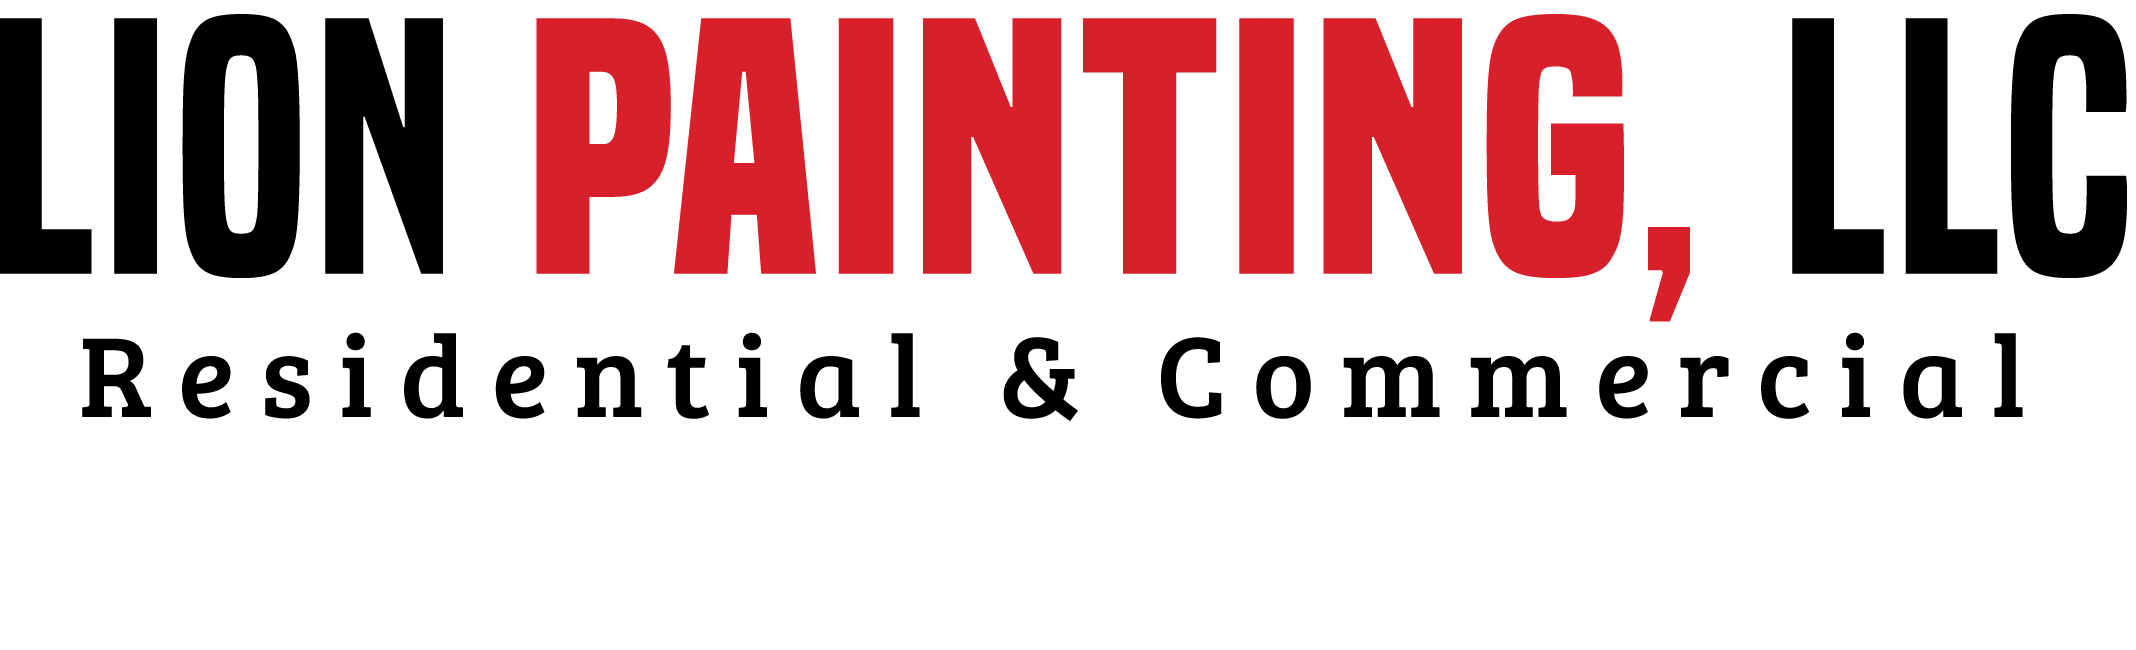 Residential and Commercial Painting Contractors in Tampa